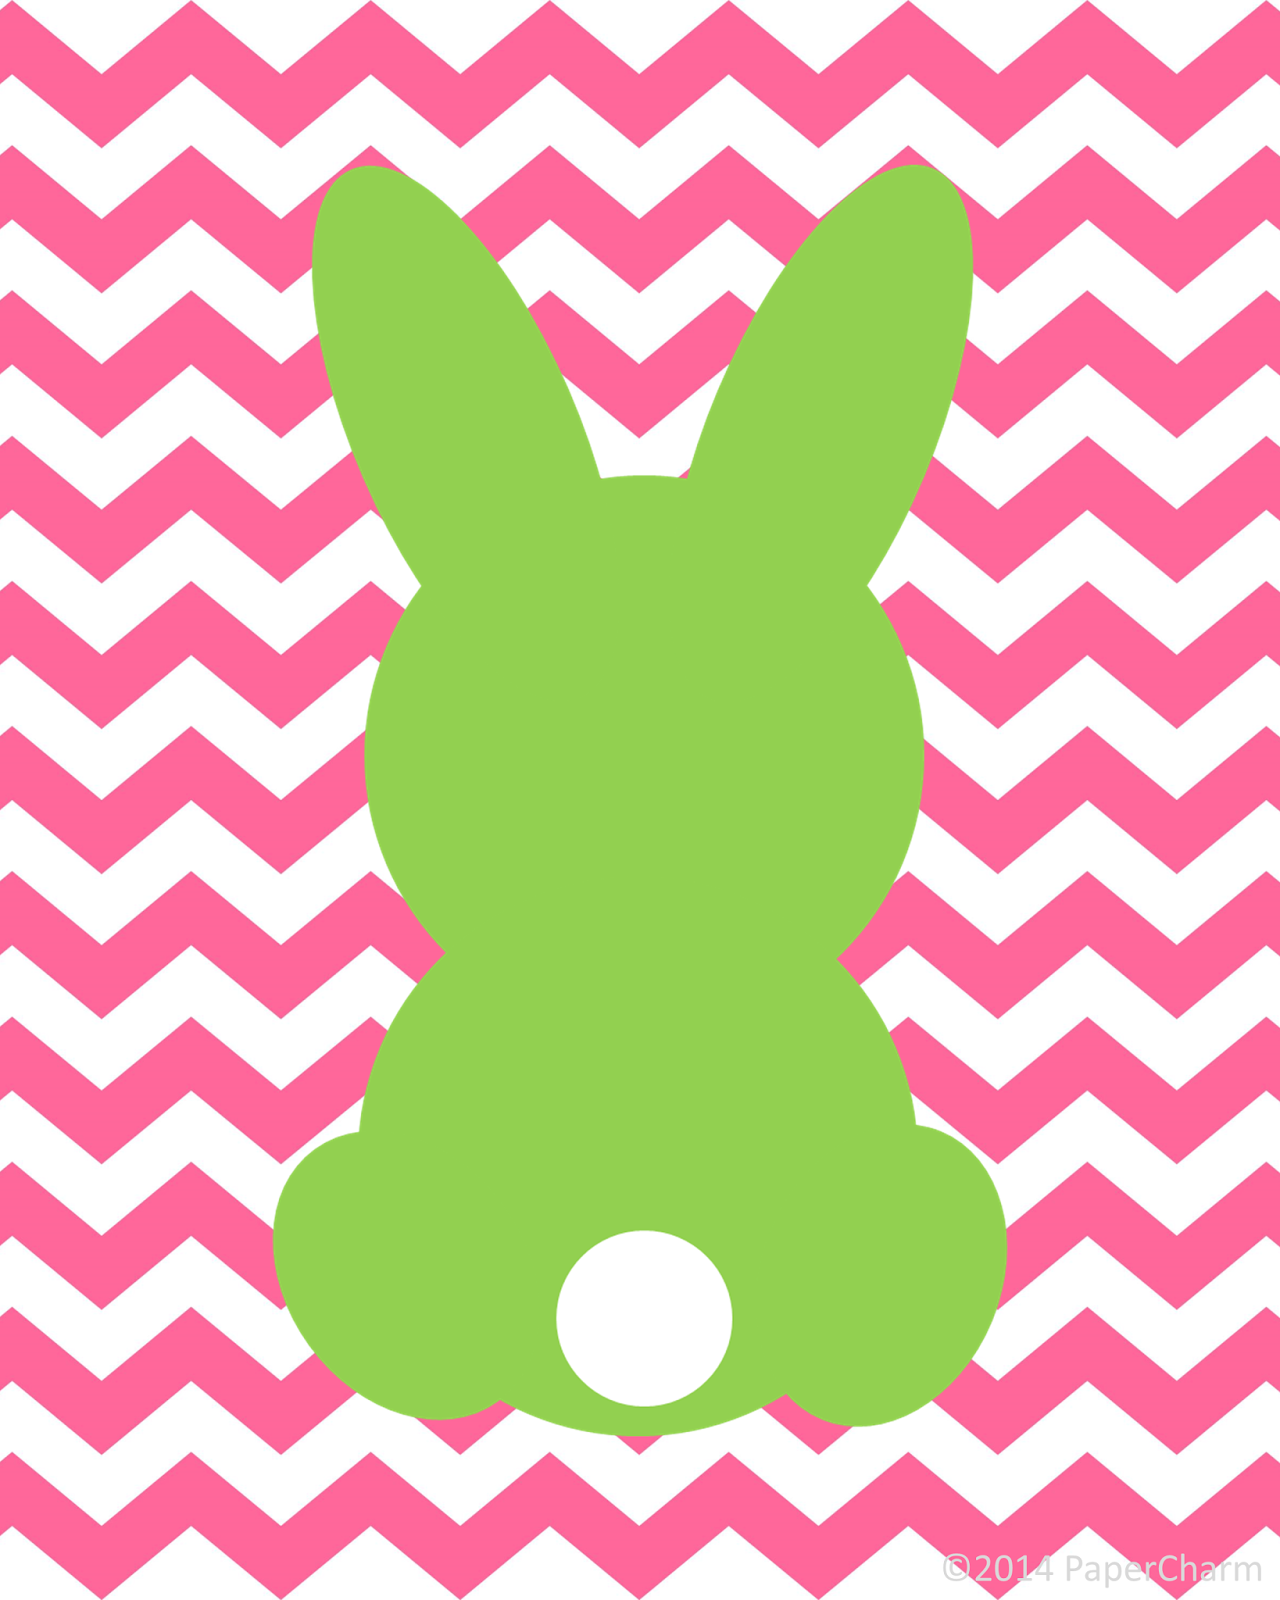 PaperCharm: Free Bunny Silhouette Easter Printable Art